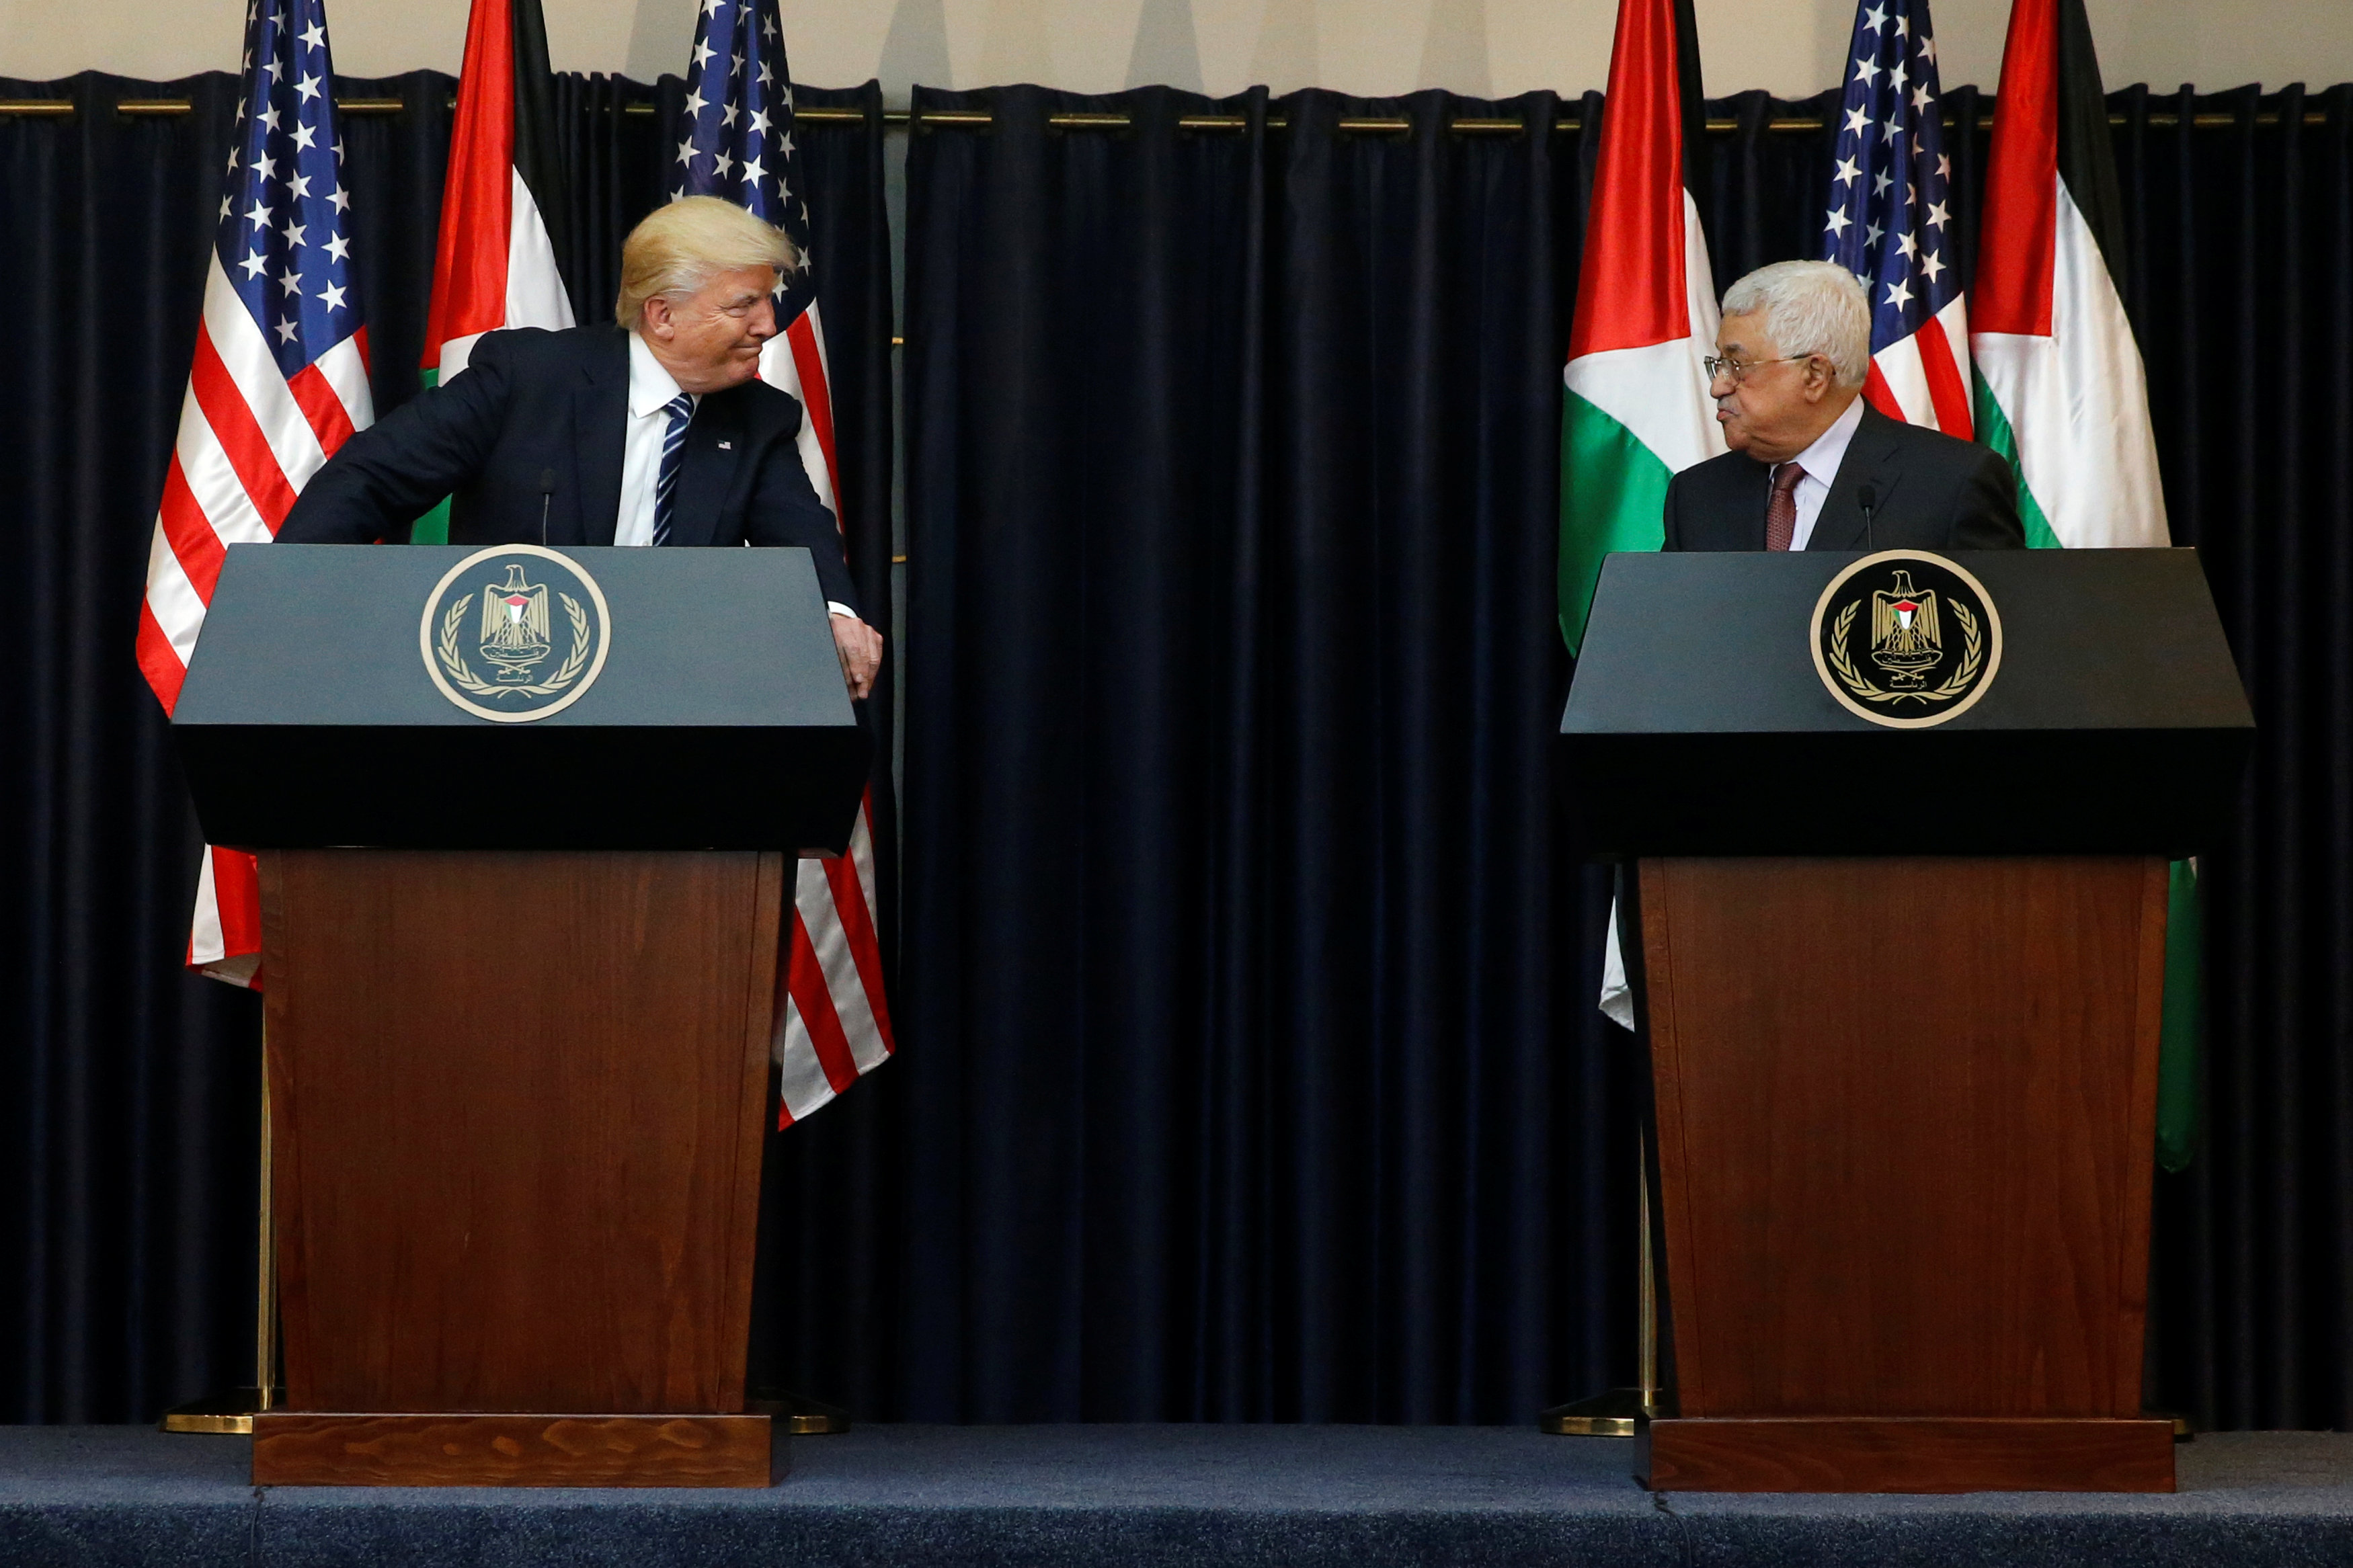 Trump plays up Middle East peace prospects after talks with Abbas